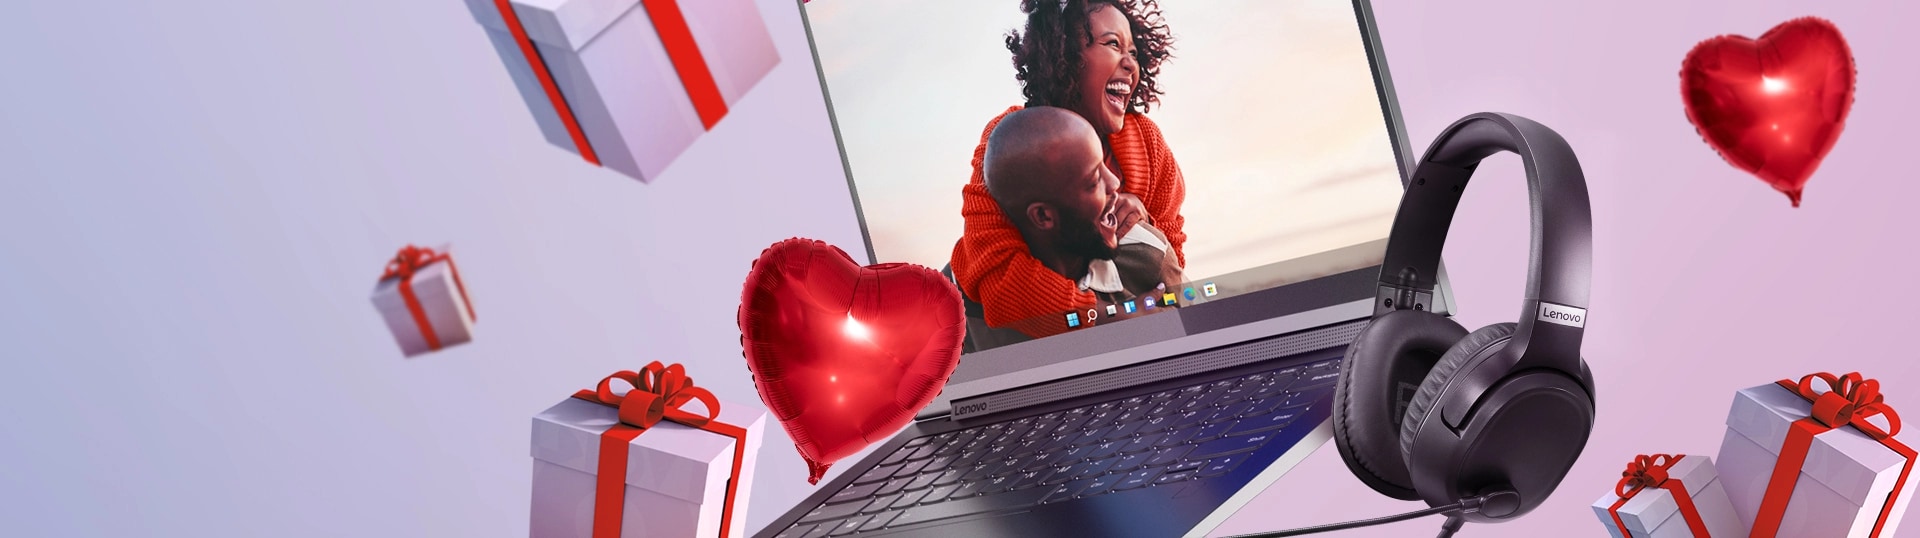 Floating open laptop, heart shaped balloons, and presents